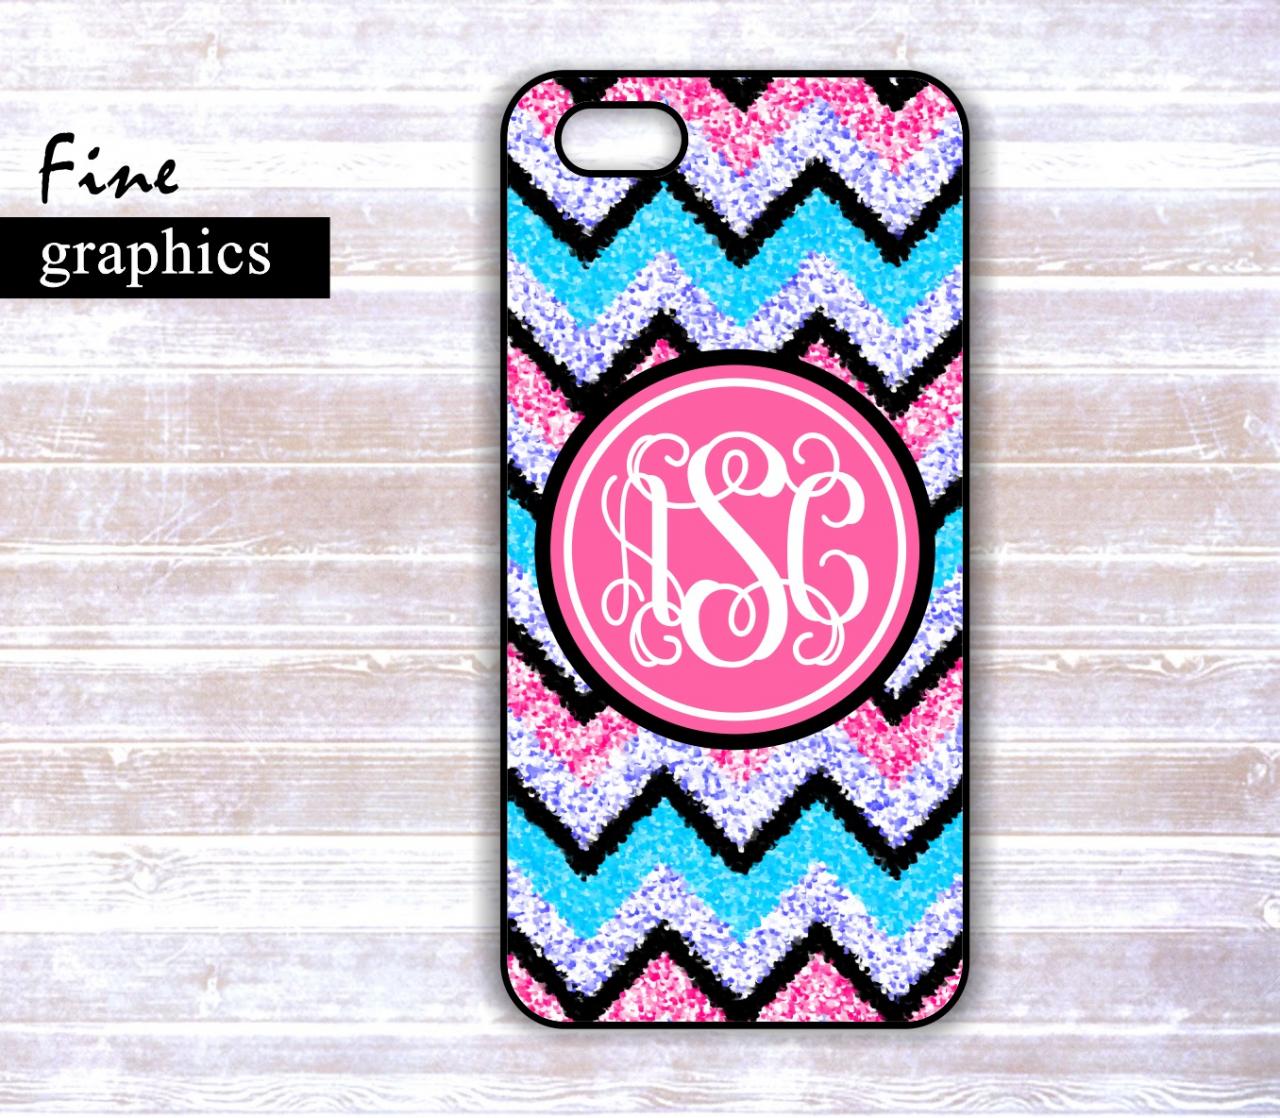 Personalized iPhone Custom Case - Monogrammed Iphone 4S case- Samsung Galaxy S3/S4 case